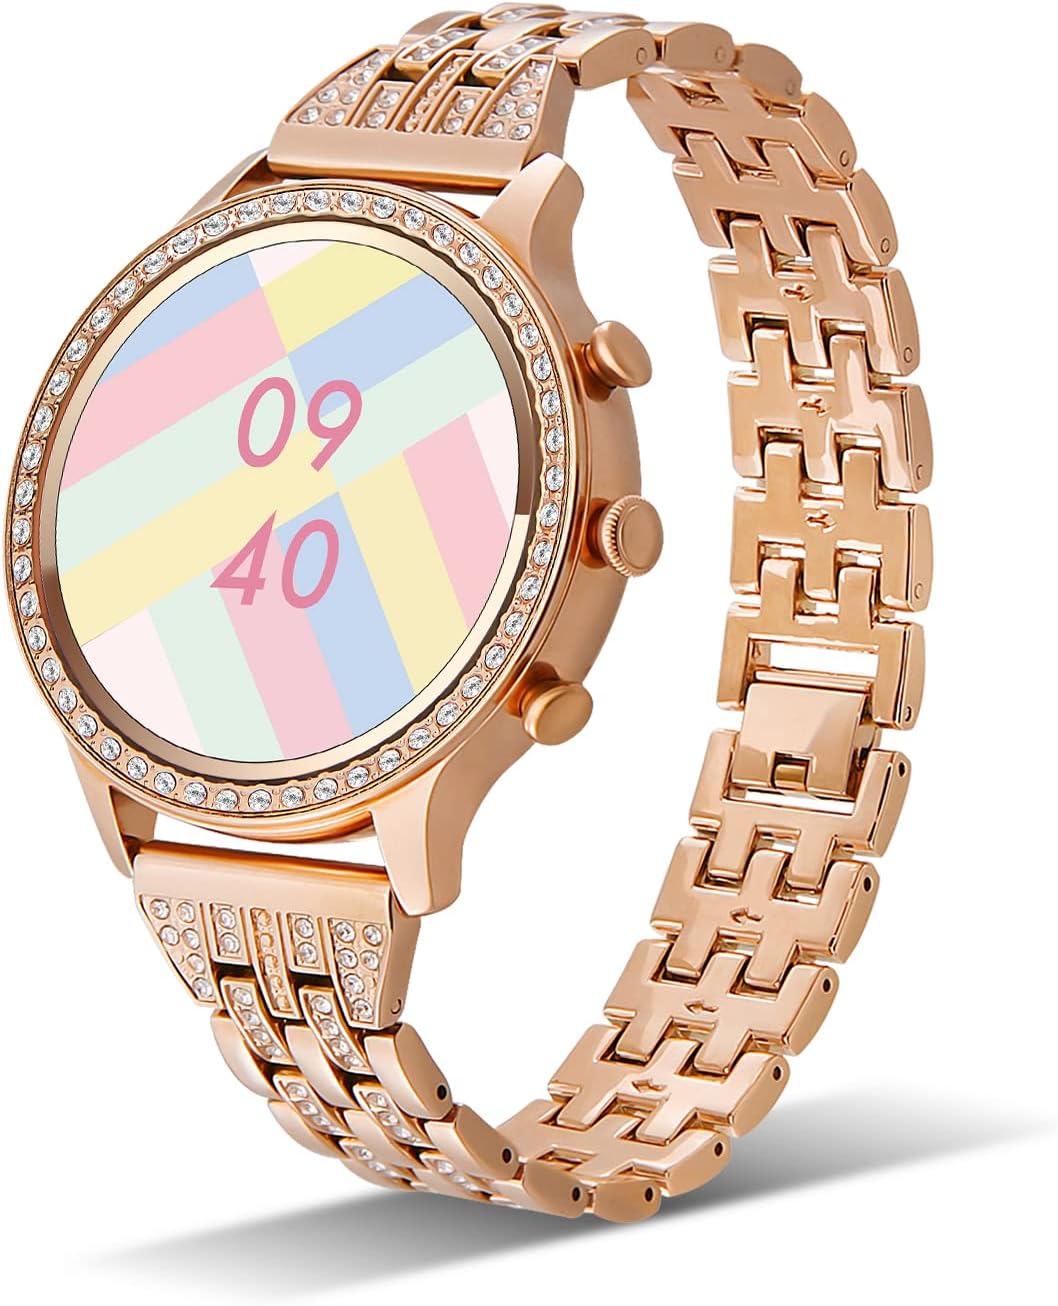 JENYNG Smart Watch for Women Review: Discover the Stylish and Feature-Packed